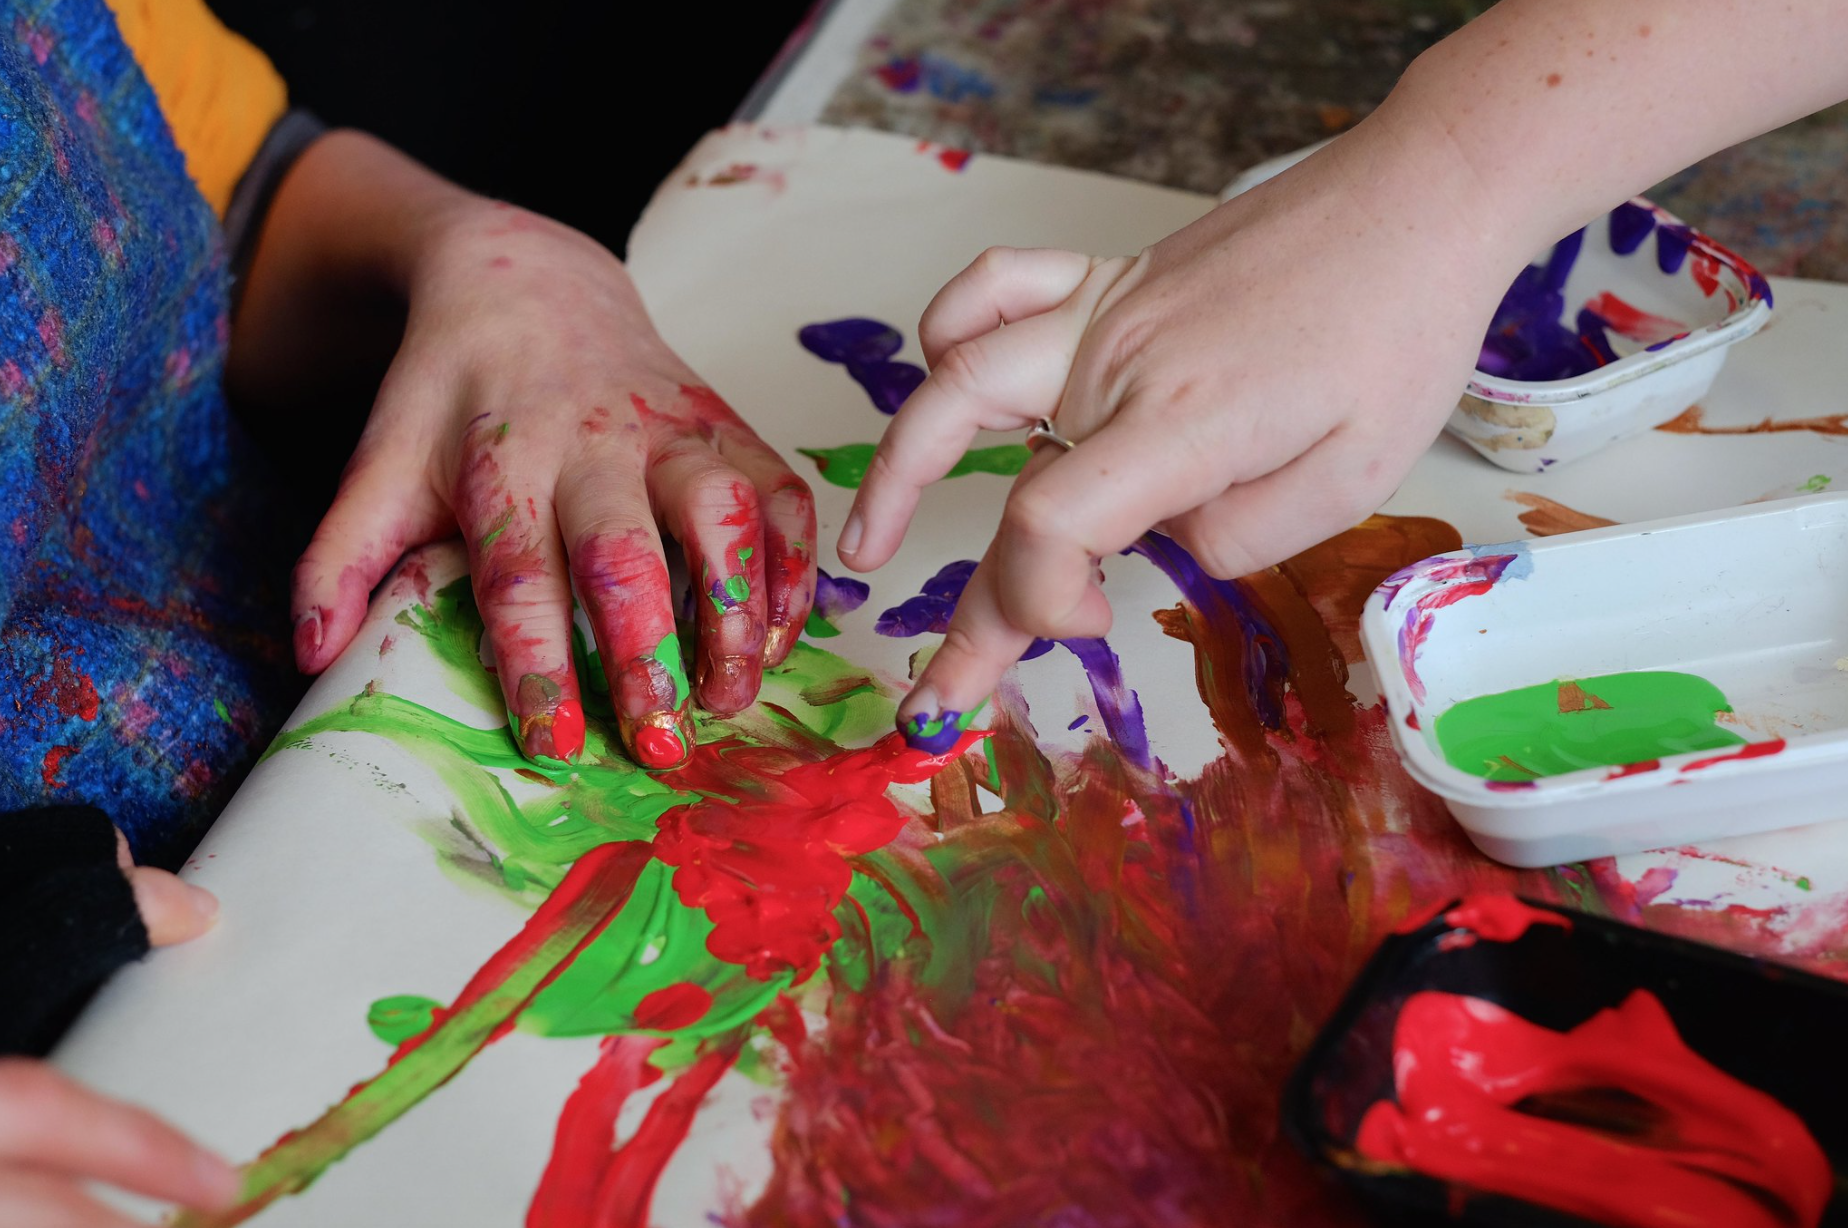 Two hands are creating artwork with red and green paints.